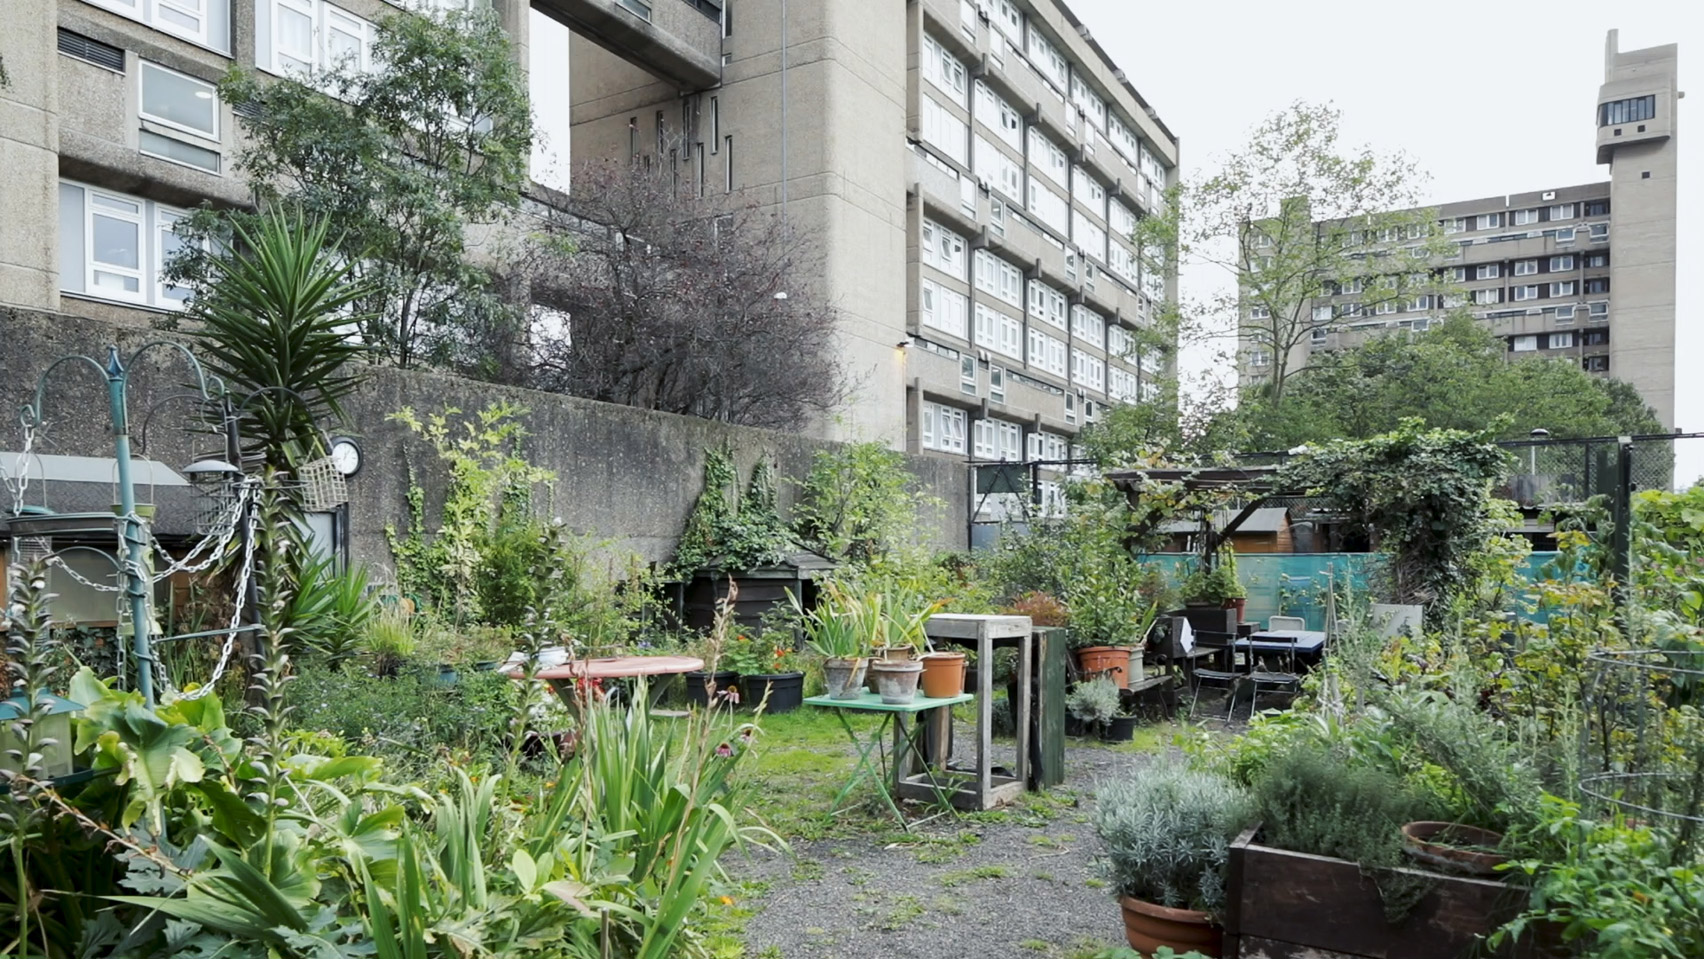 Community gardens at Glenkerry House by Erno Goldfinger